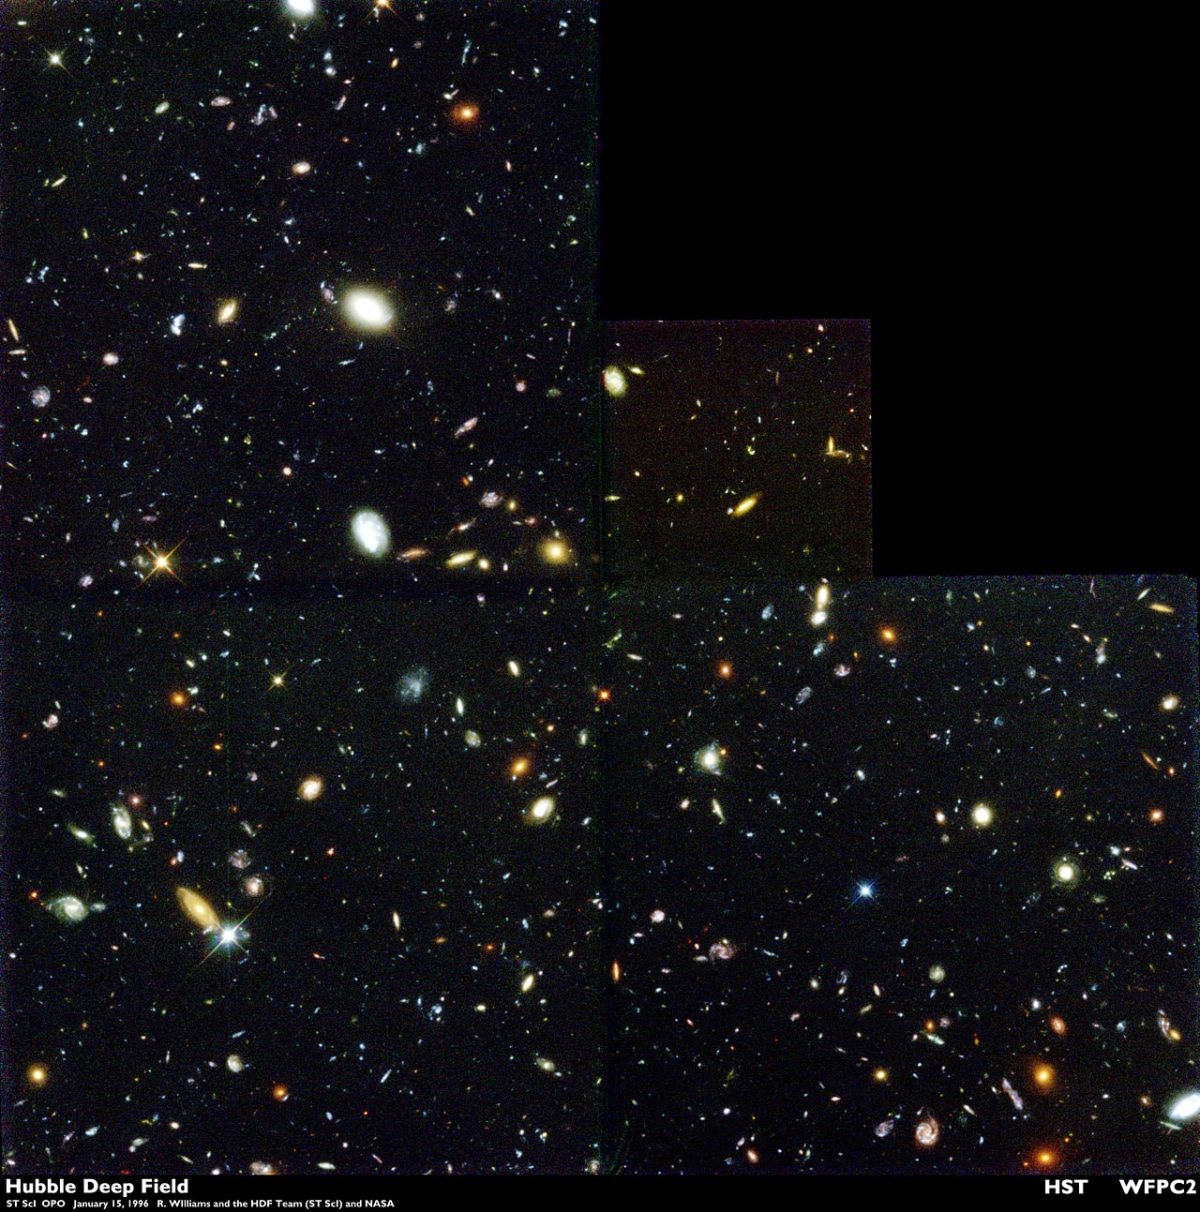 Capturing the Cosmos: Hubble's Historic Deep Field Image